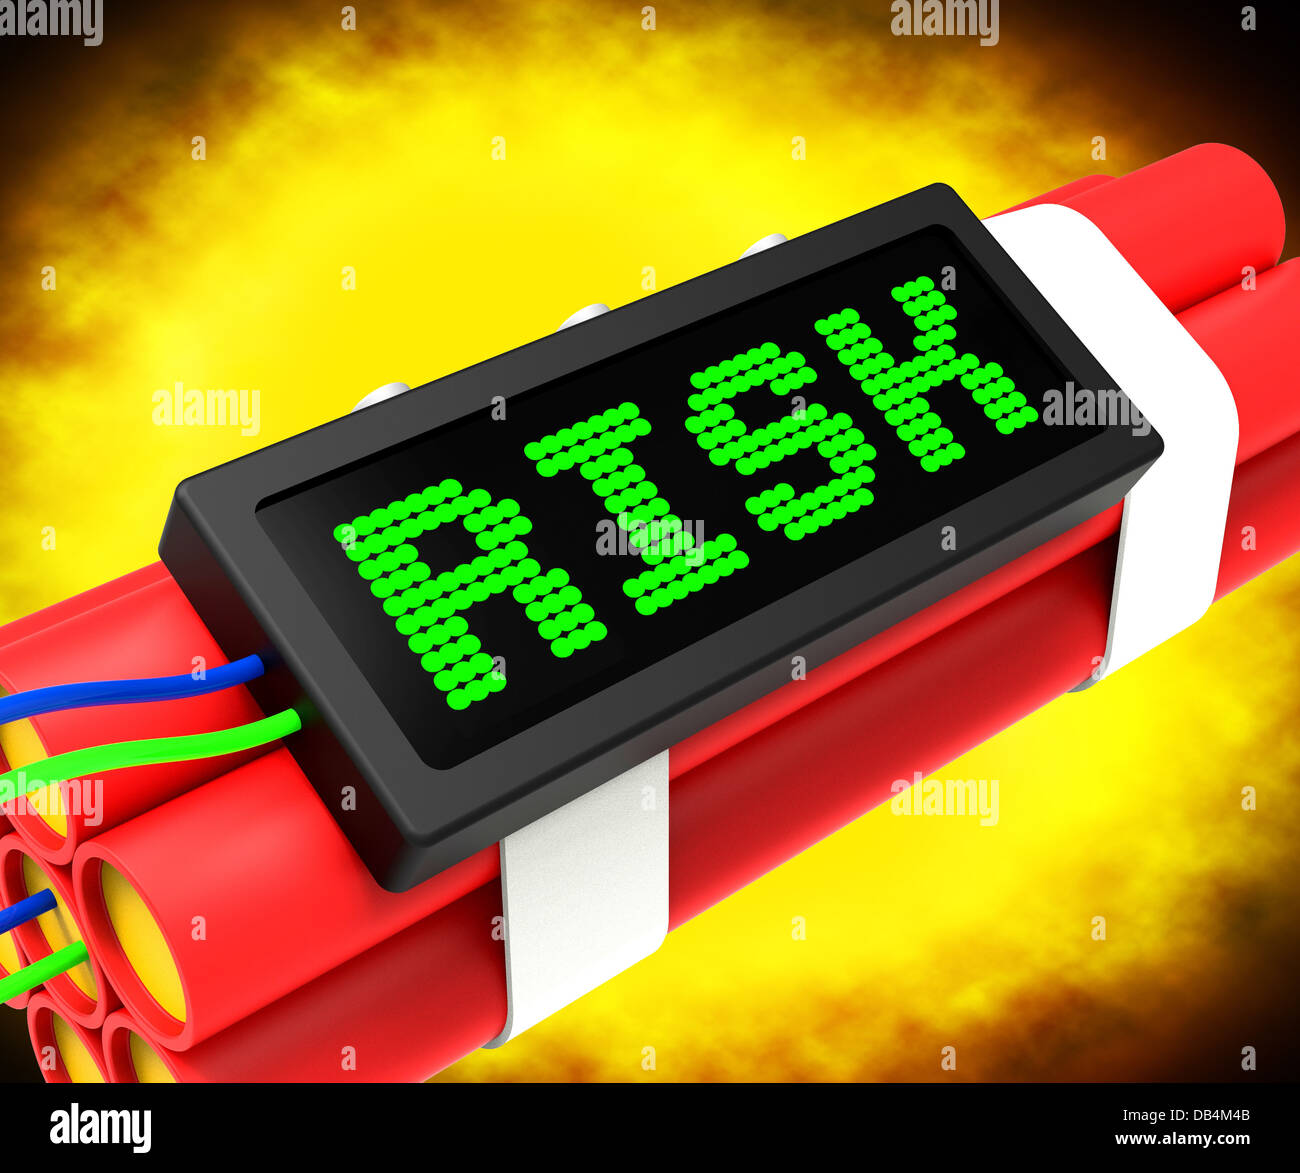 Risk On Dynamite Shows Unstable Situation Or Dangerous Stock Photo